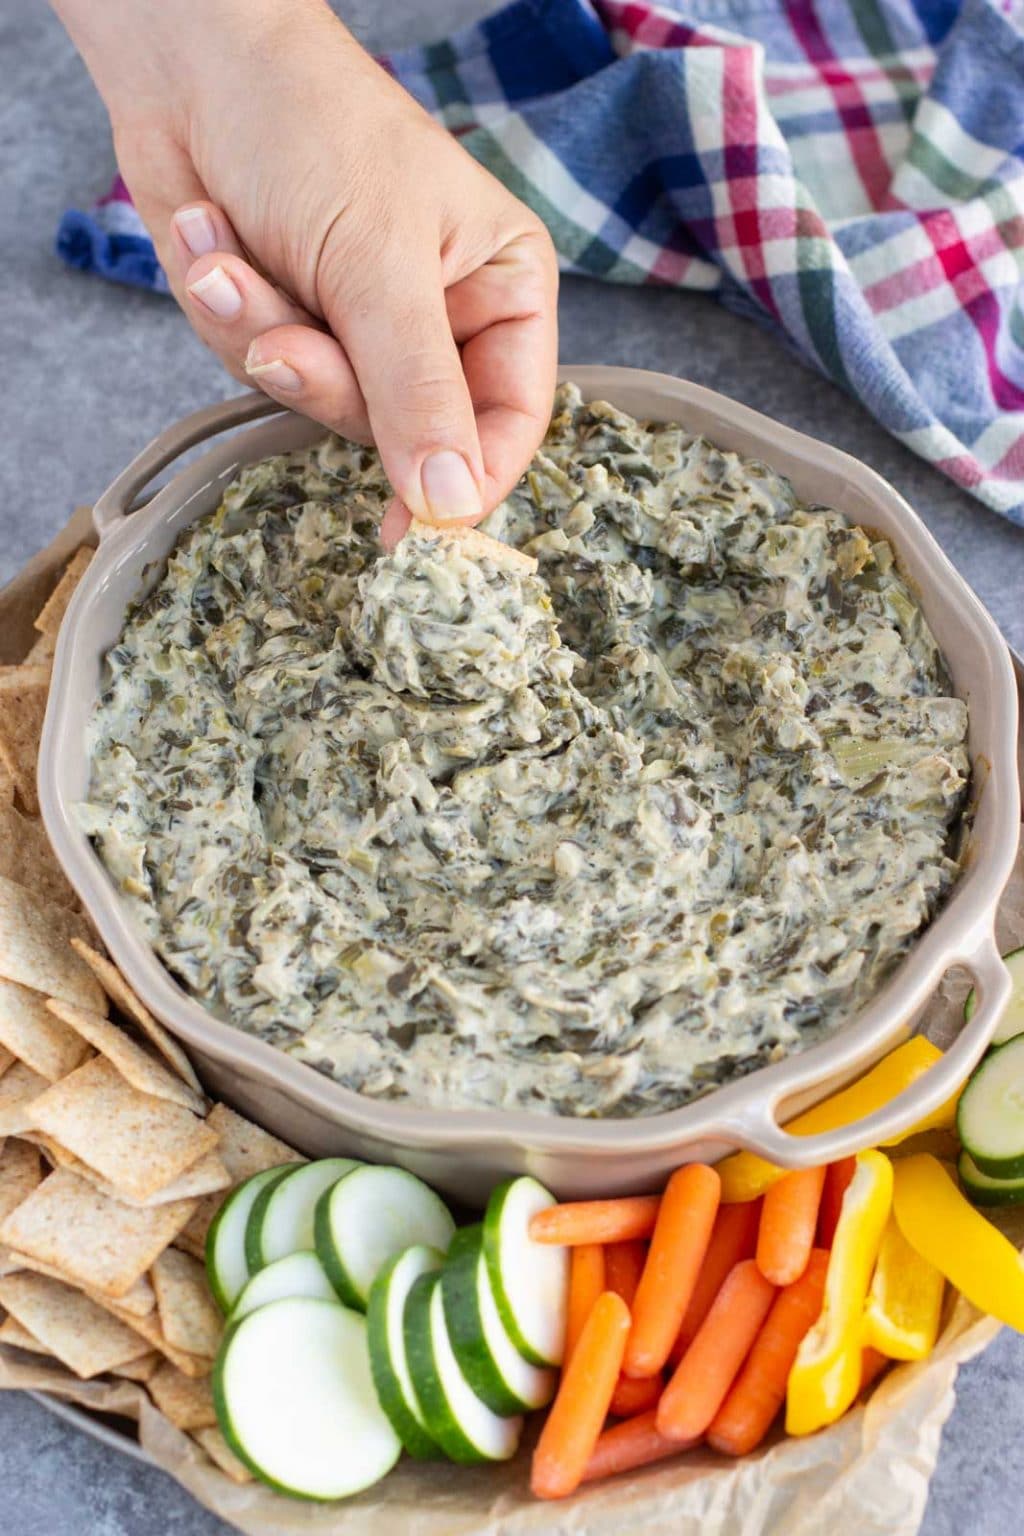 A hand dipping a cracker into a dish filled with spinach and artichoke dip next to a blue plaid towel.